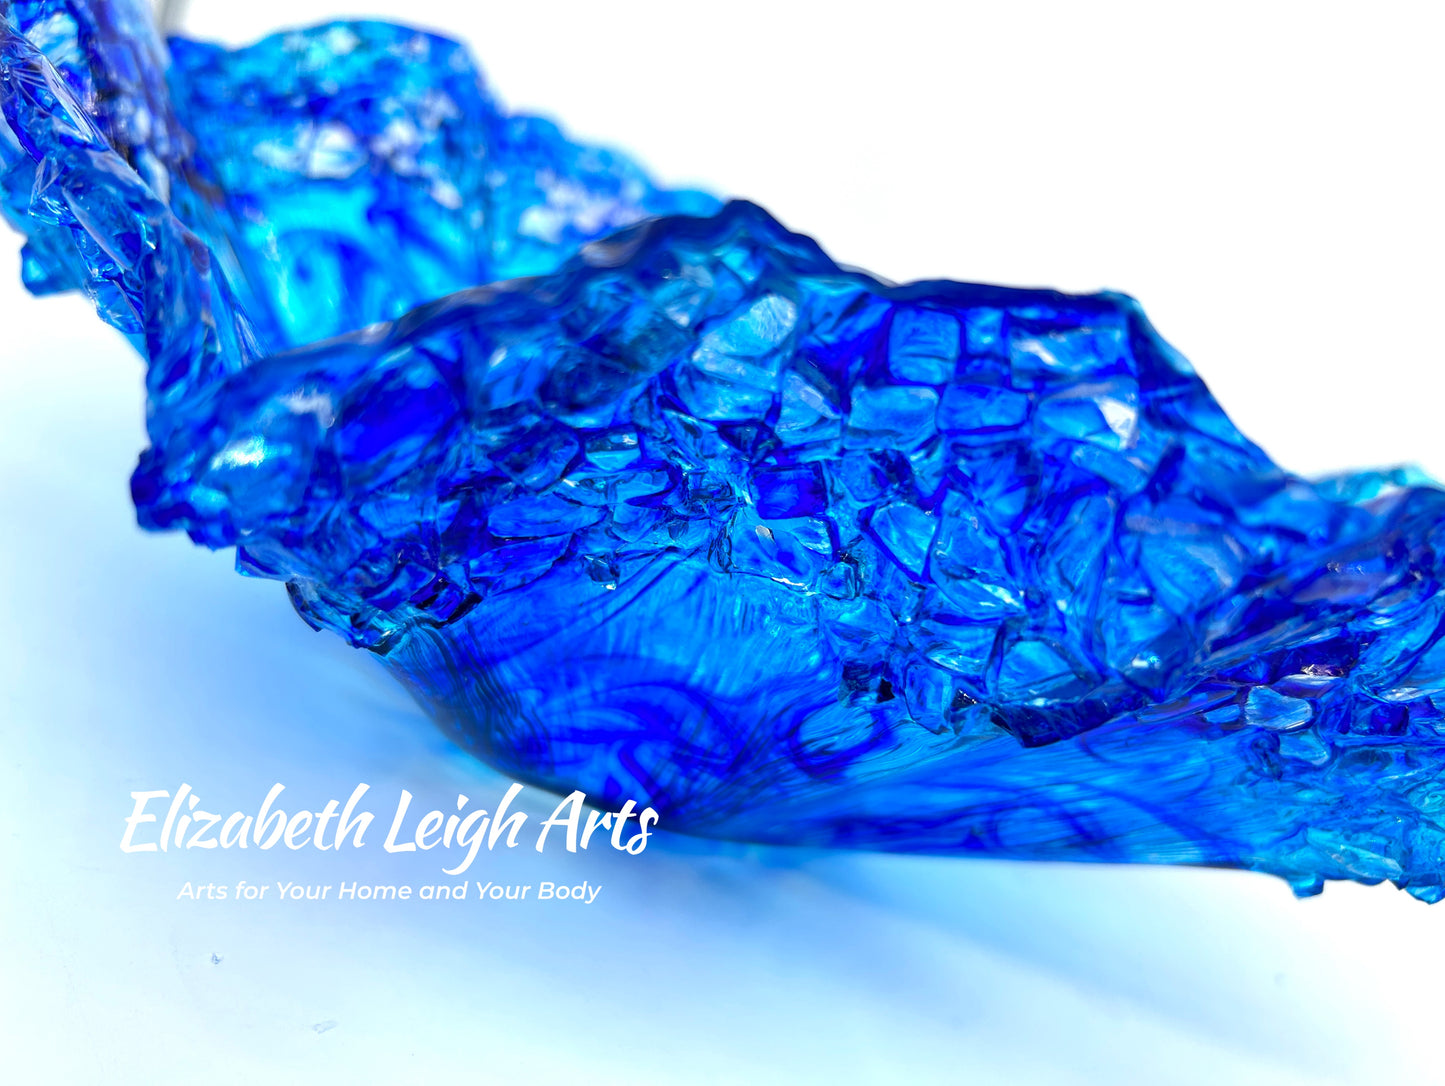 Blue Resin and Glass Decorative Bowl Free Form